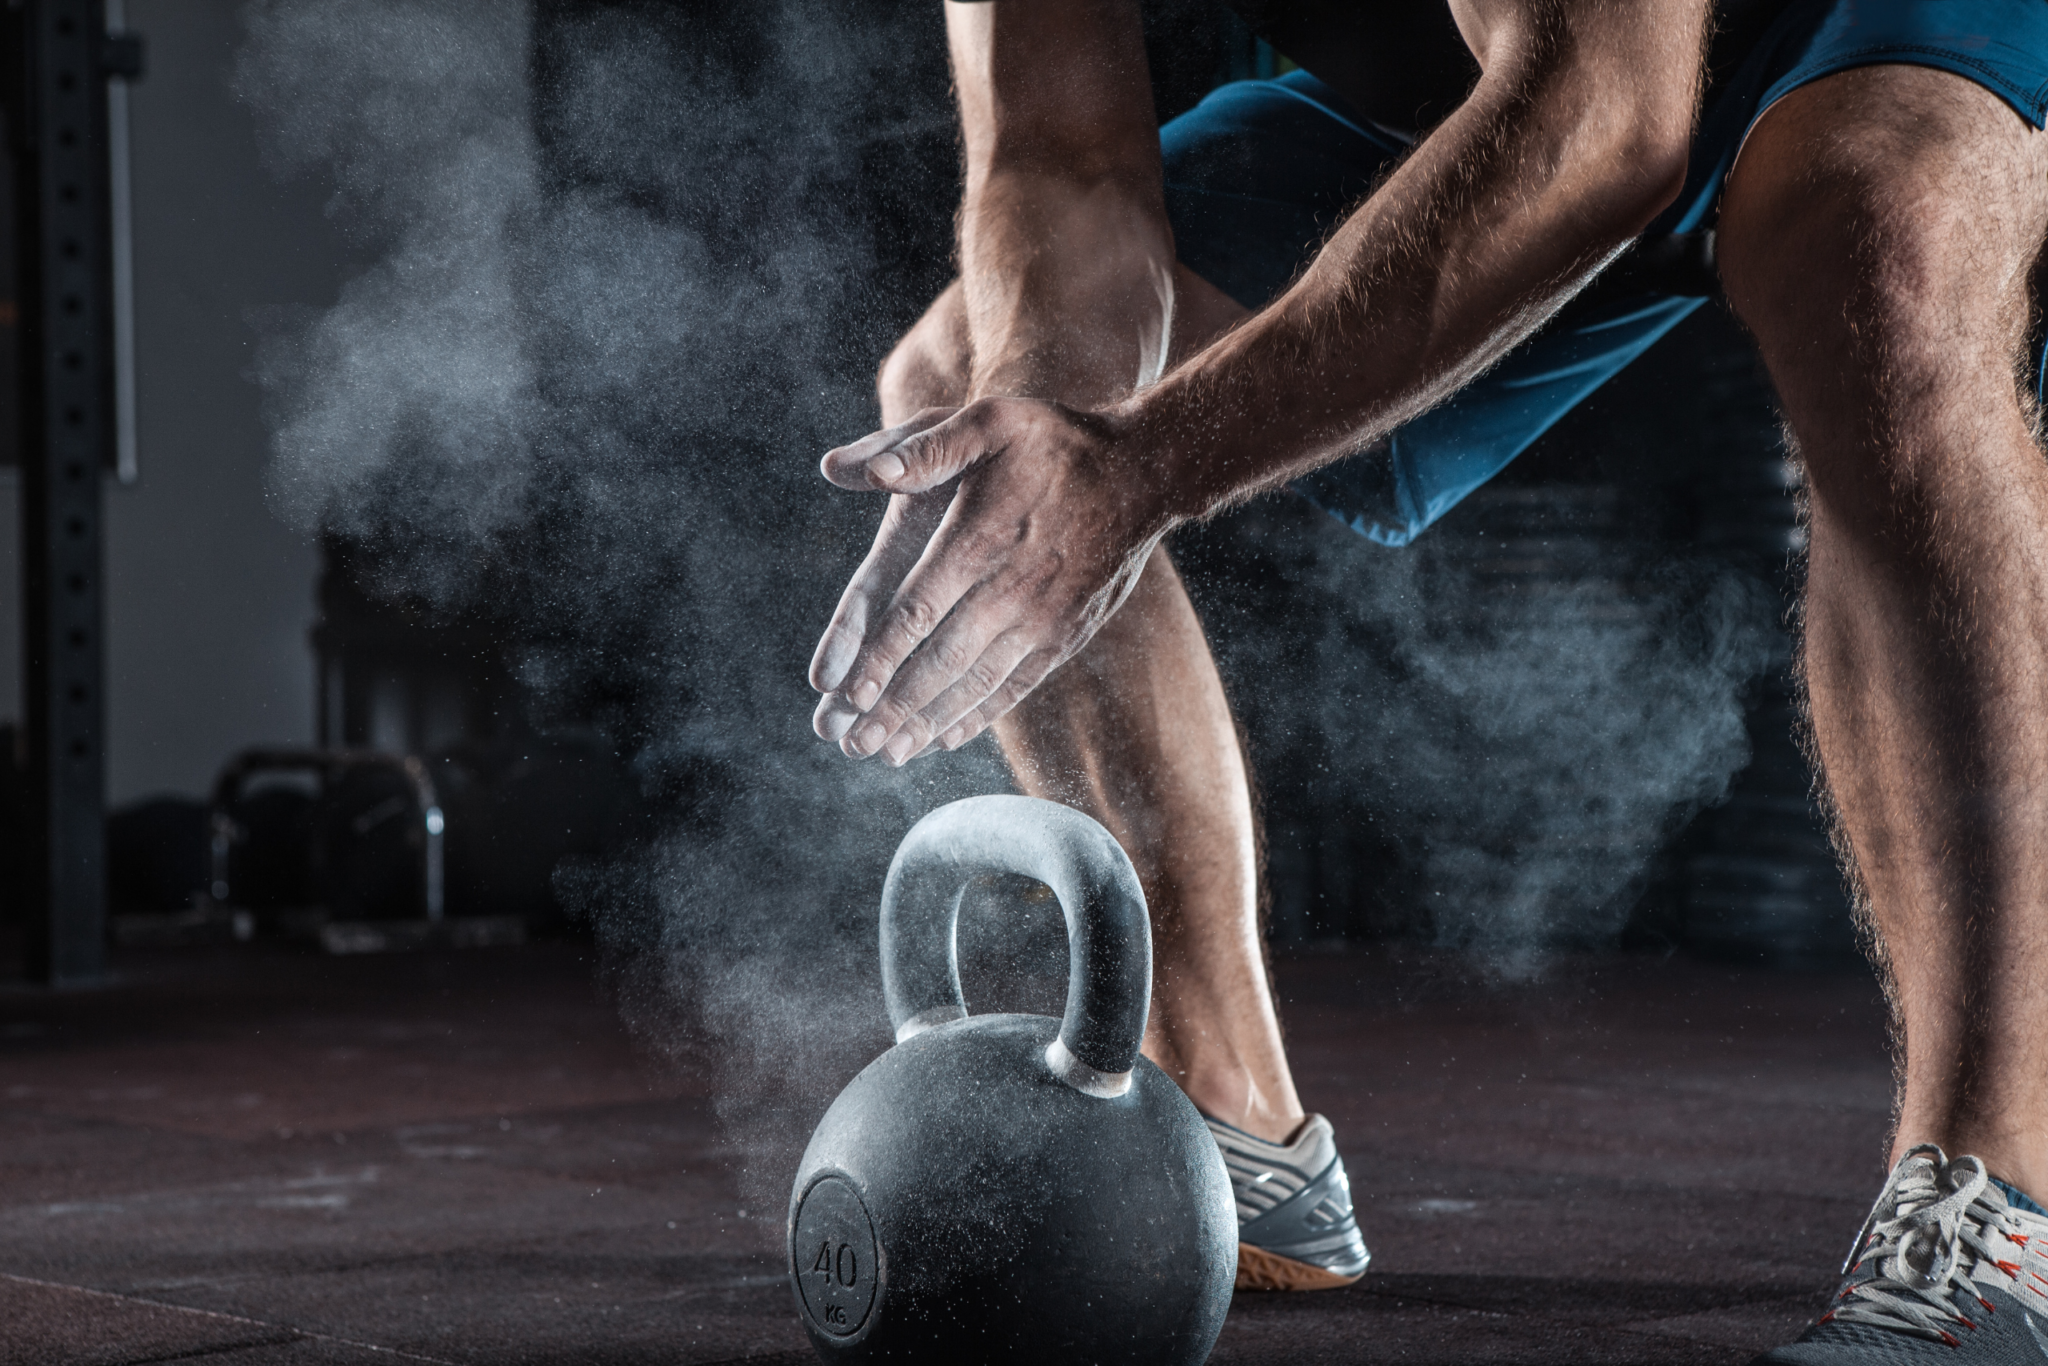 Image of someone picking up a kettle bell.